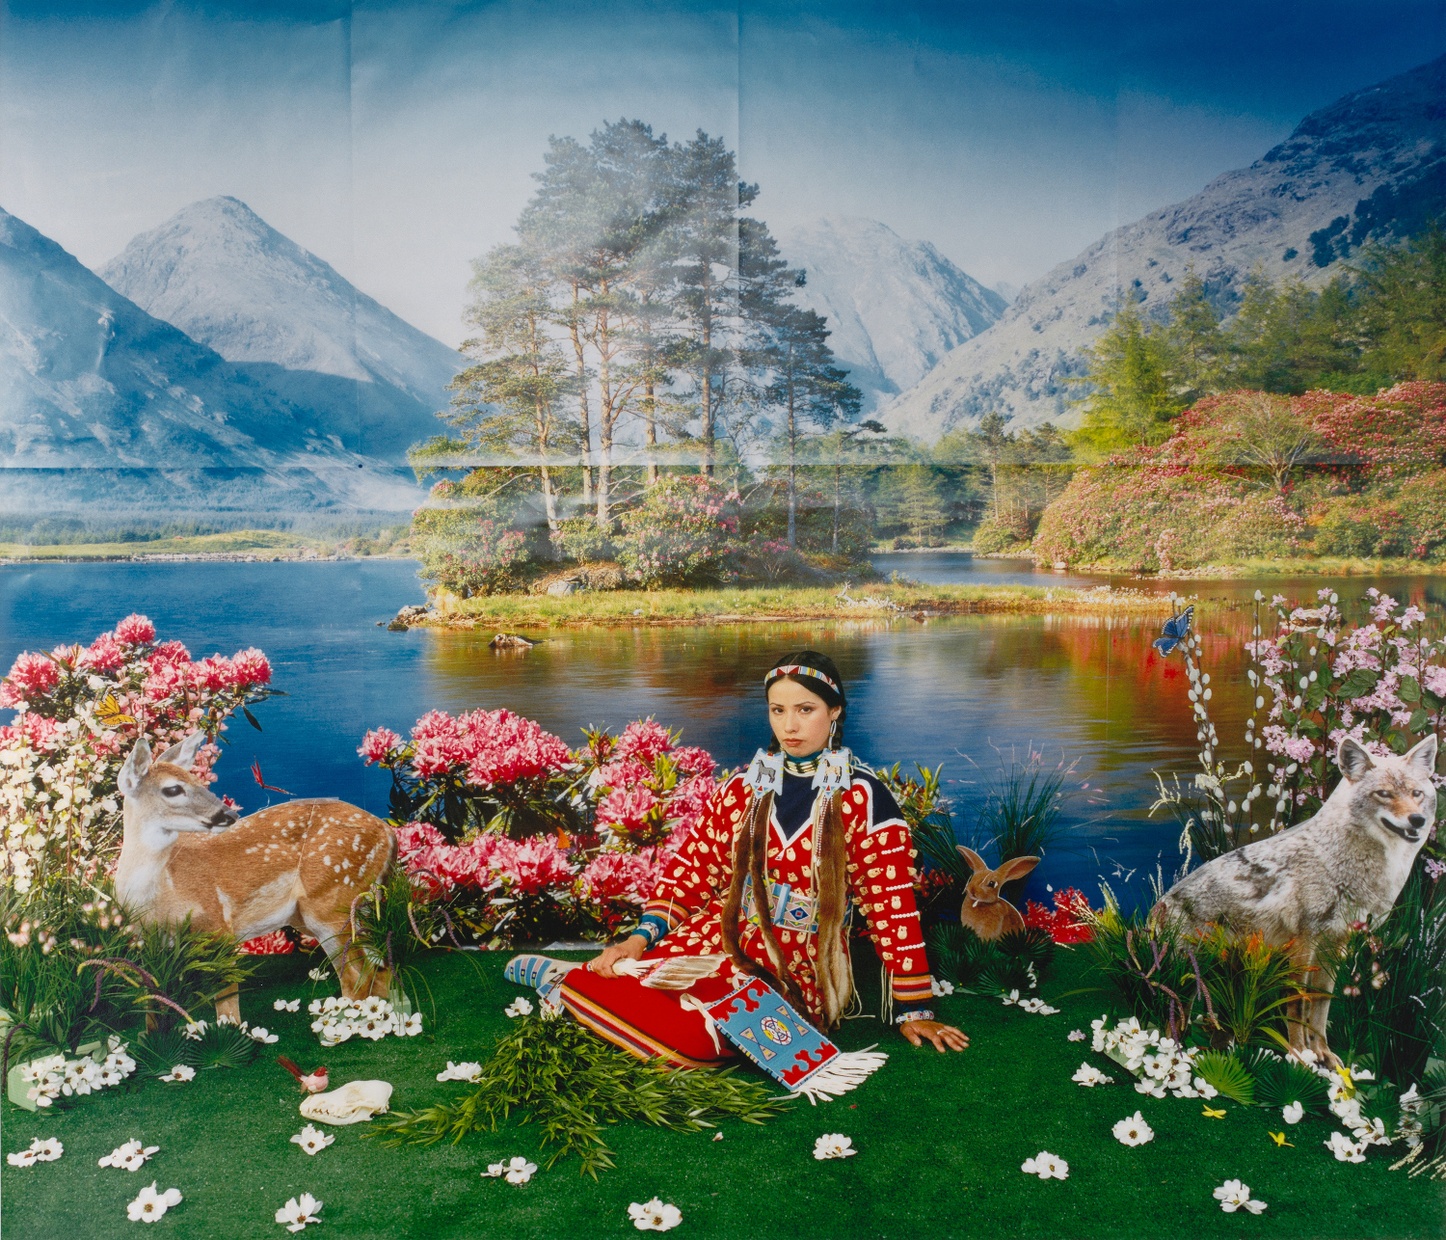 A woman in a traditional Native American dress sits on artificial grass, before a fake painted backdrop, and surrounded by fake flowers and plastic animals.